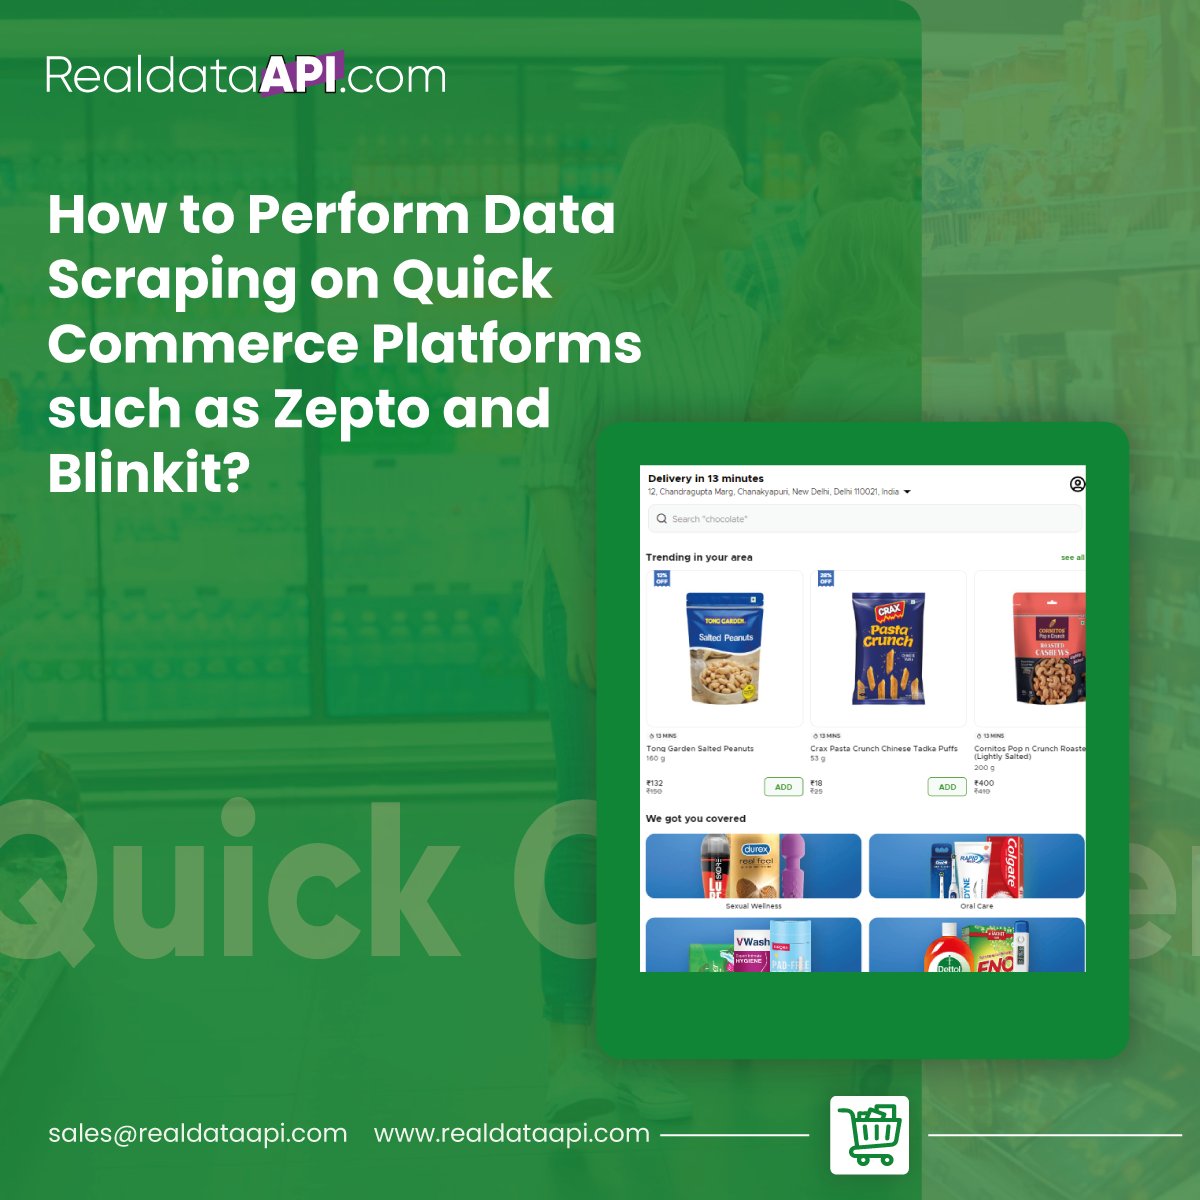 Learn how to perform #datascrapingonquickcommerce platforms like Zepto and Blinkit to gain valuable #marketinsight.

Know More: realdataapi.com/quick-commerce…

#BlinkitQcommerceDataScraping #usa #uk #uae #BlinkitQcommerceDataScraper
#ZeptoQcommerceDataScraper
#ZeptoQcommerceDataScraping